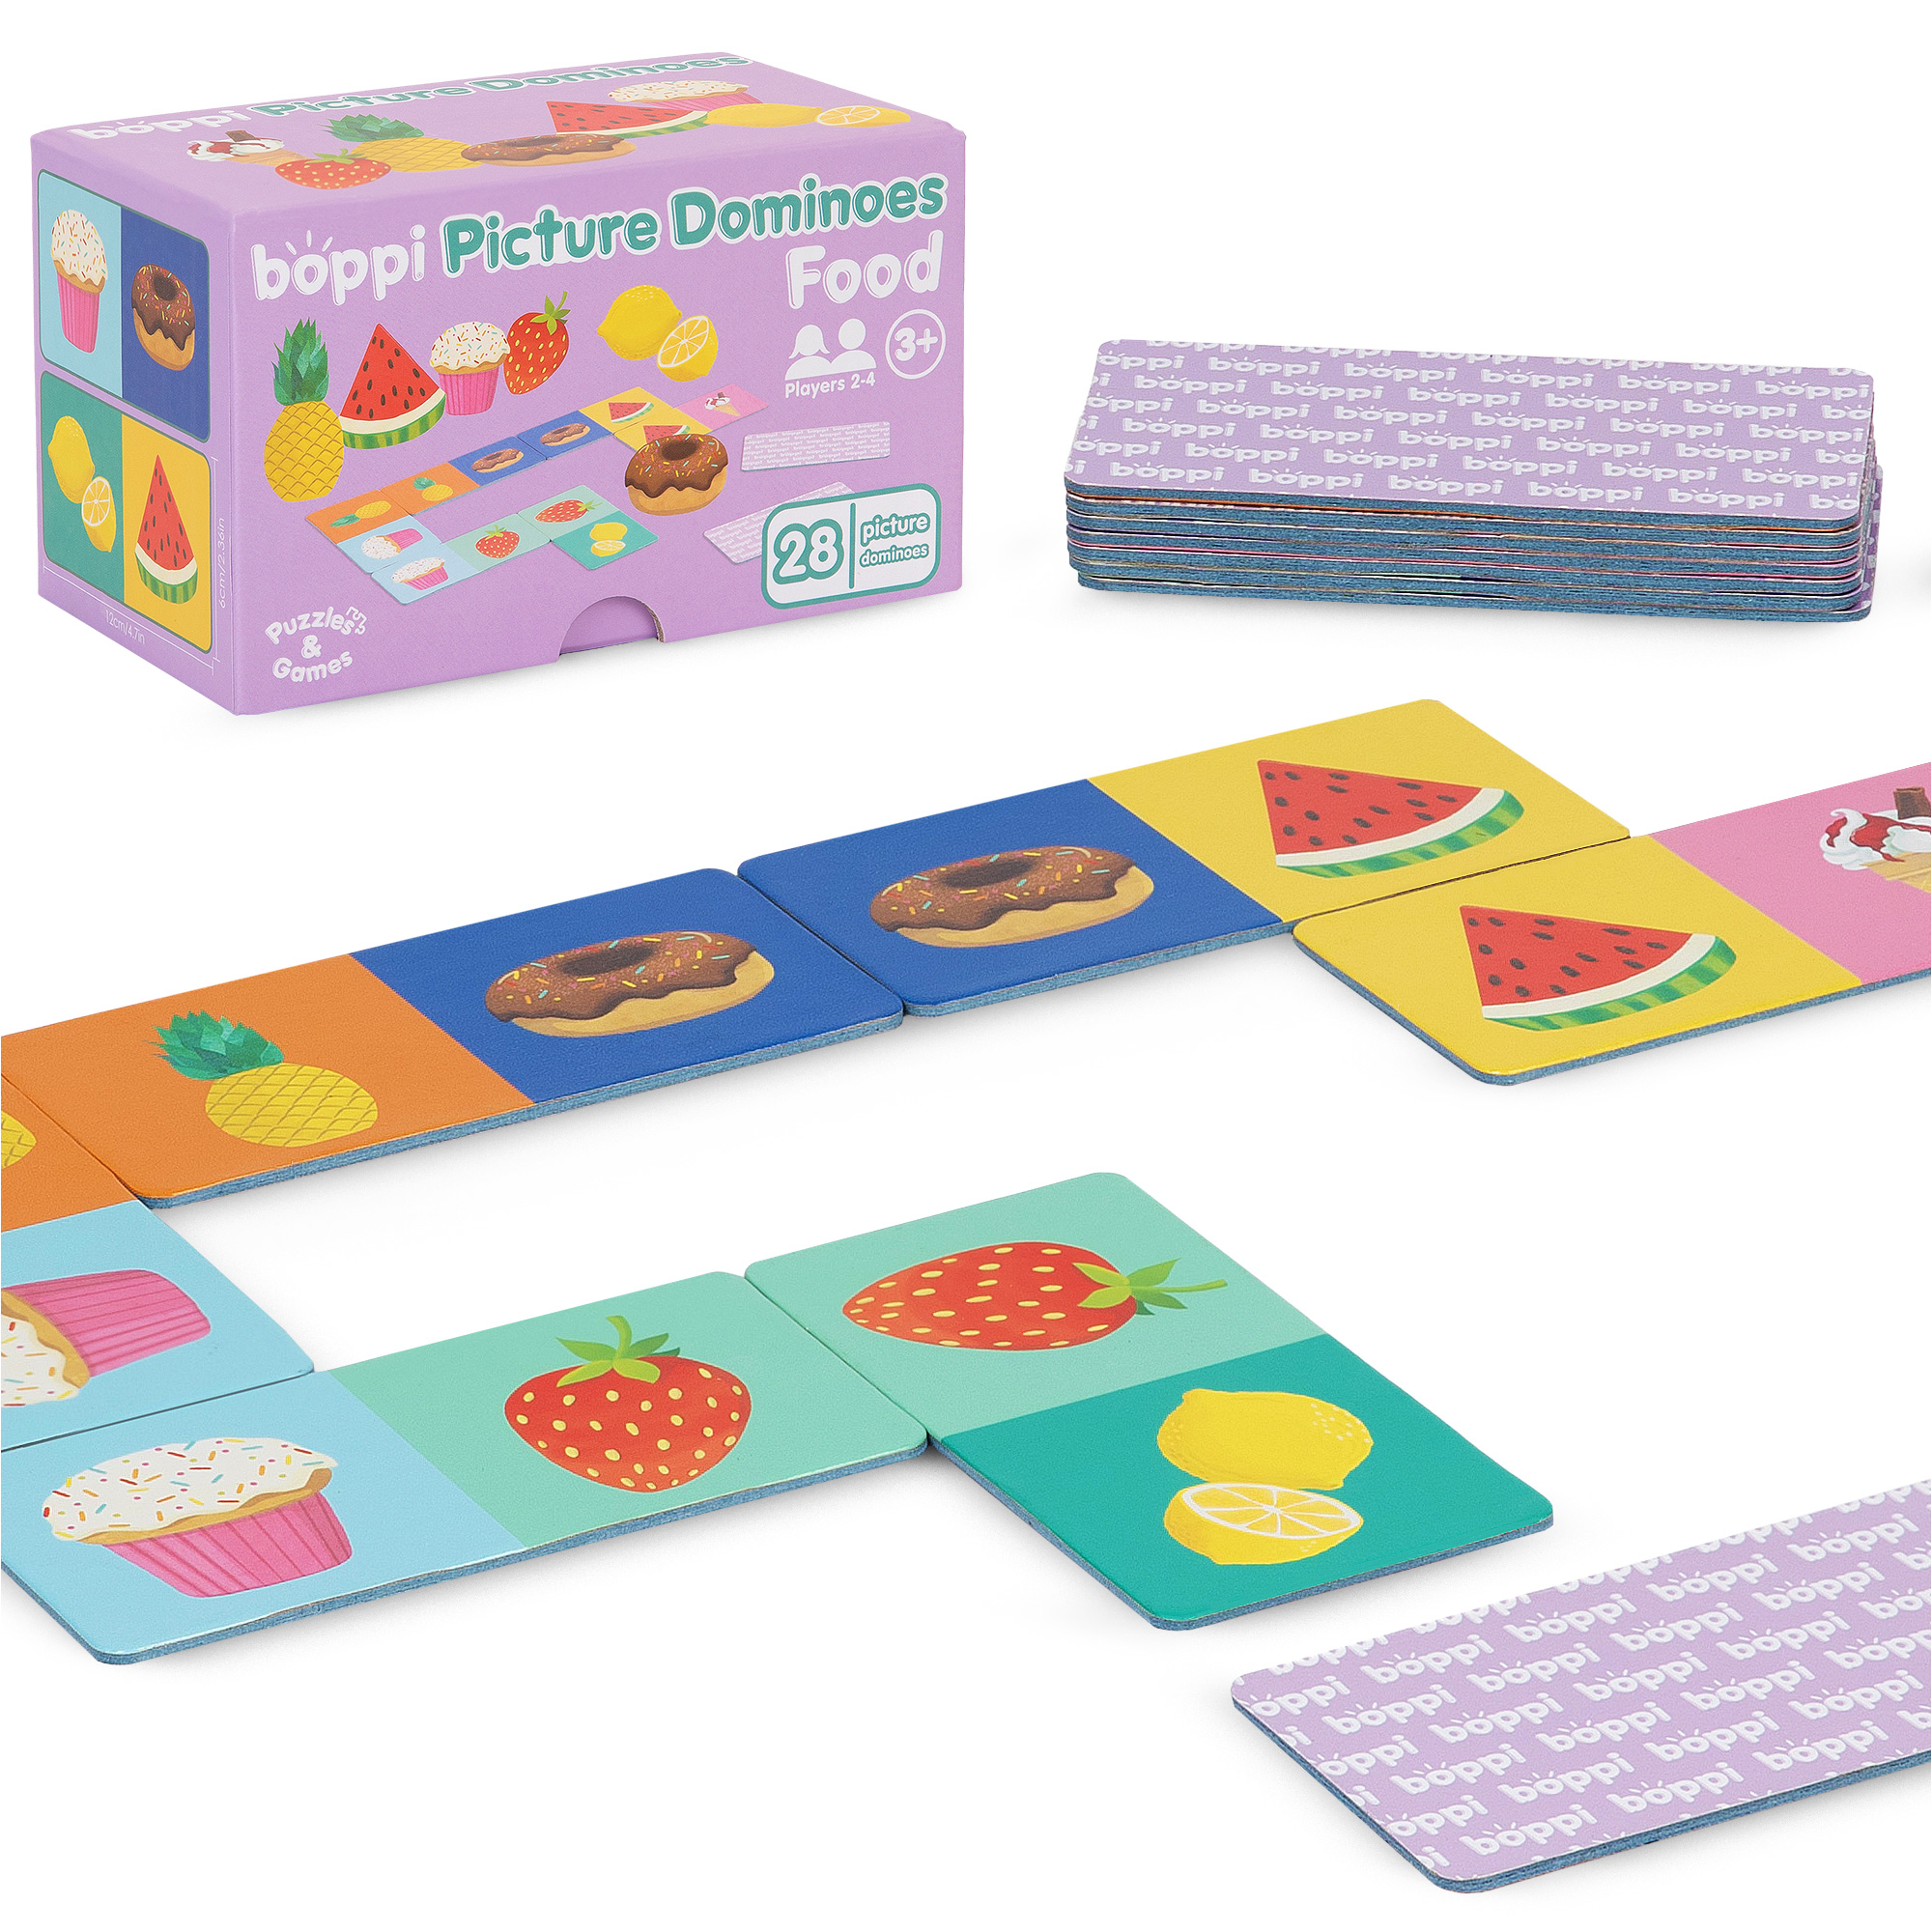 boppi Picture Dominoes Game – Food